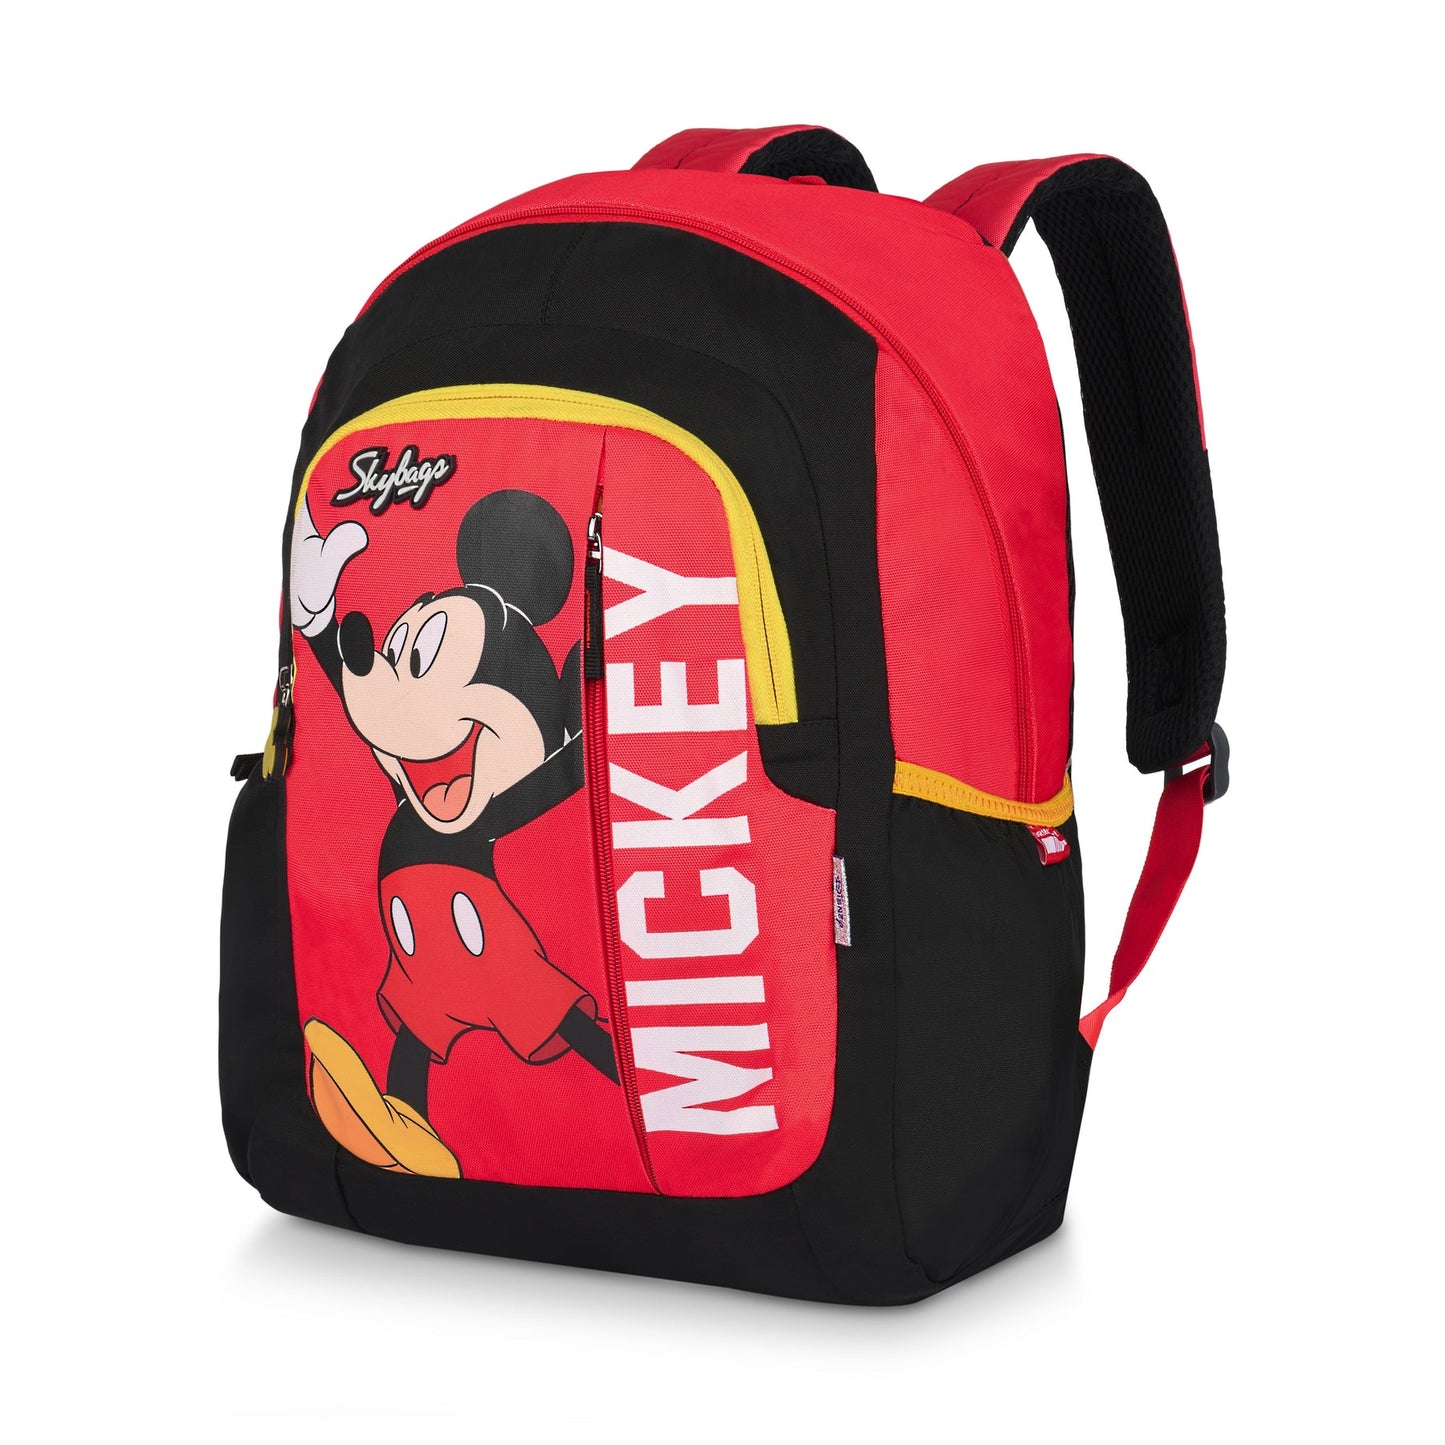 Skybags Mickey Champ 03 23L Backpack